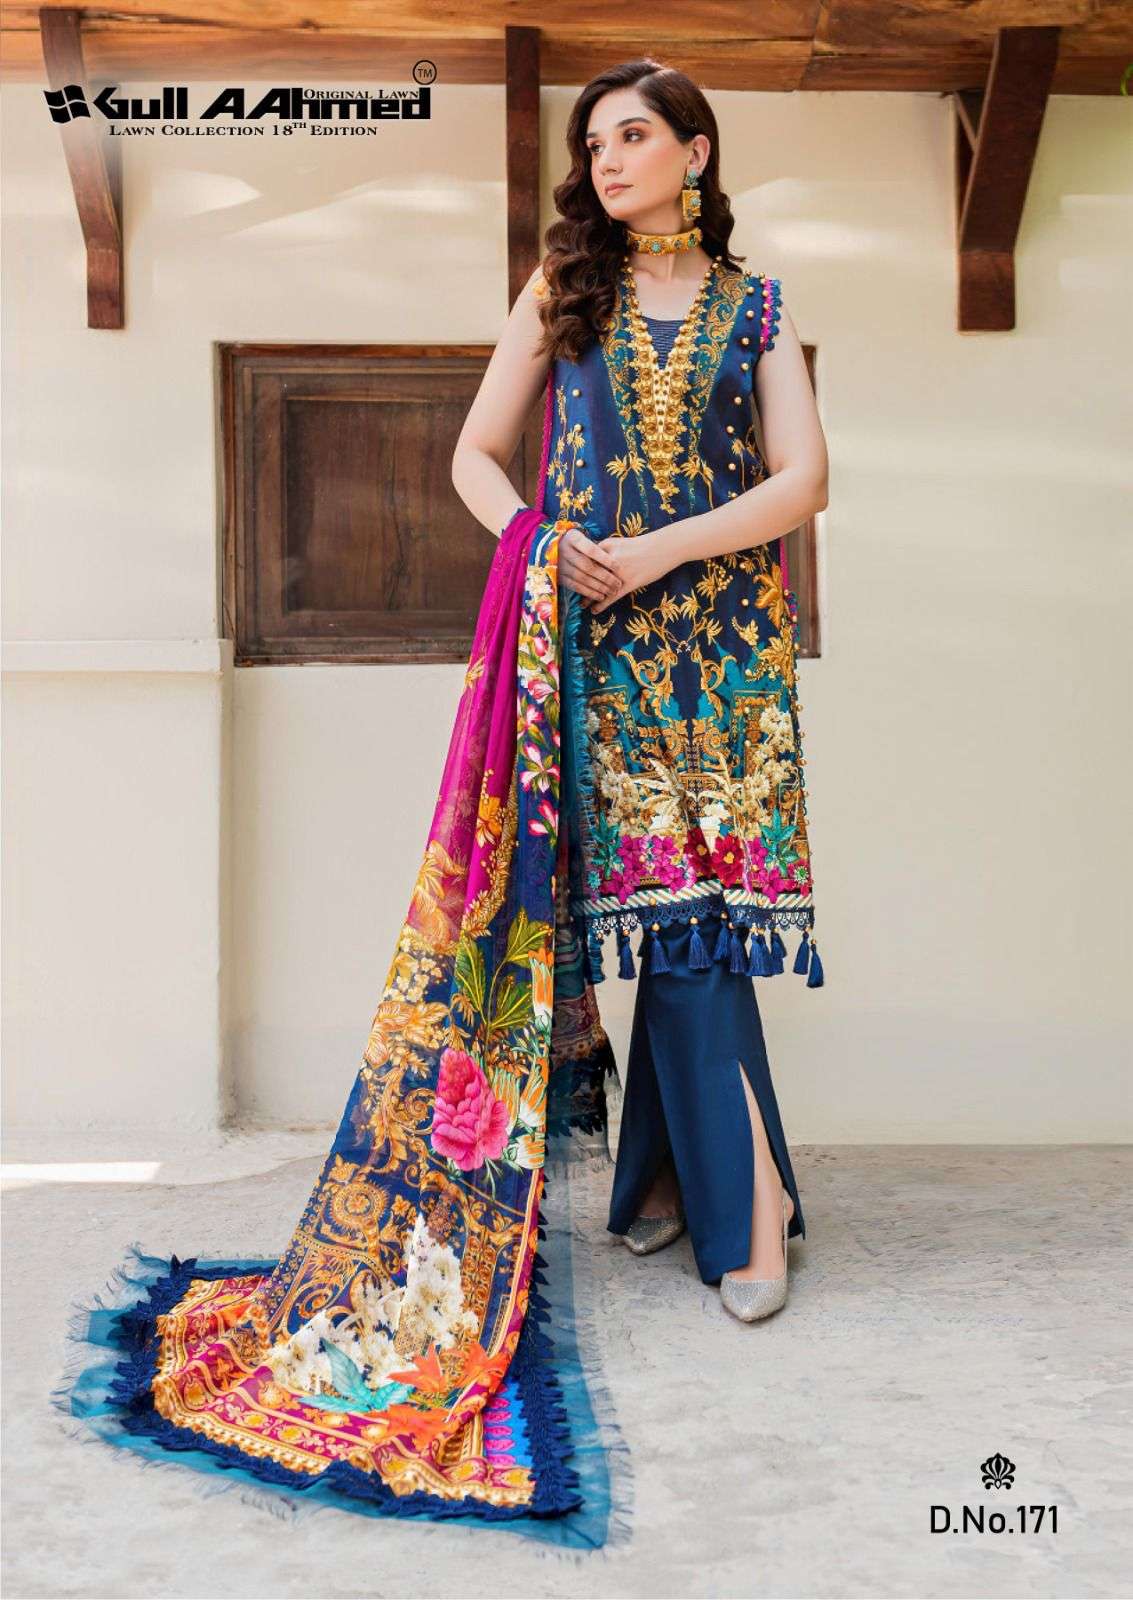 GULL AAHMED LAWN COLLECTION VOL 18 